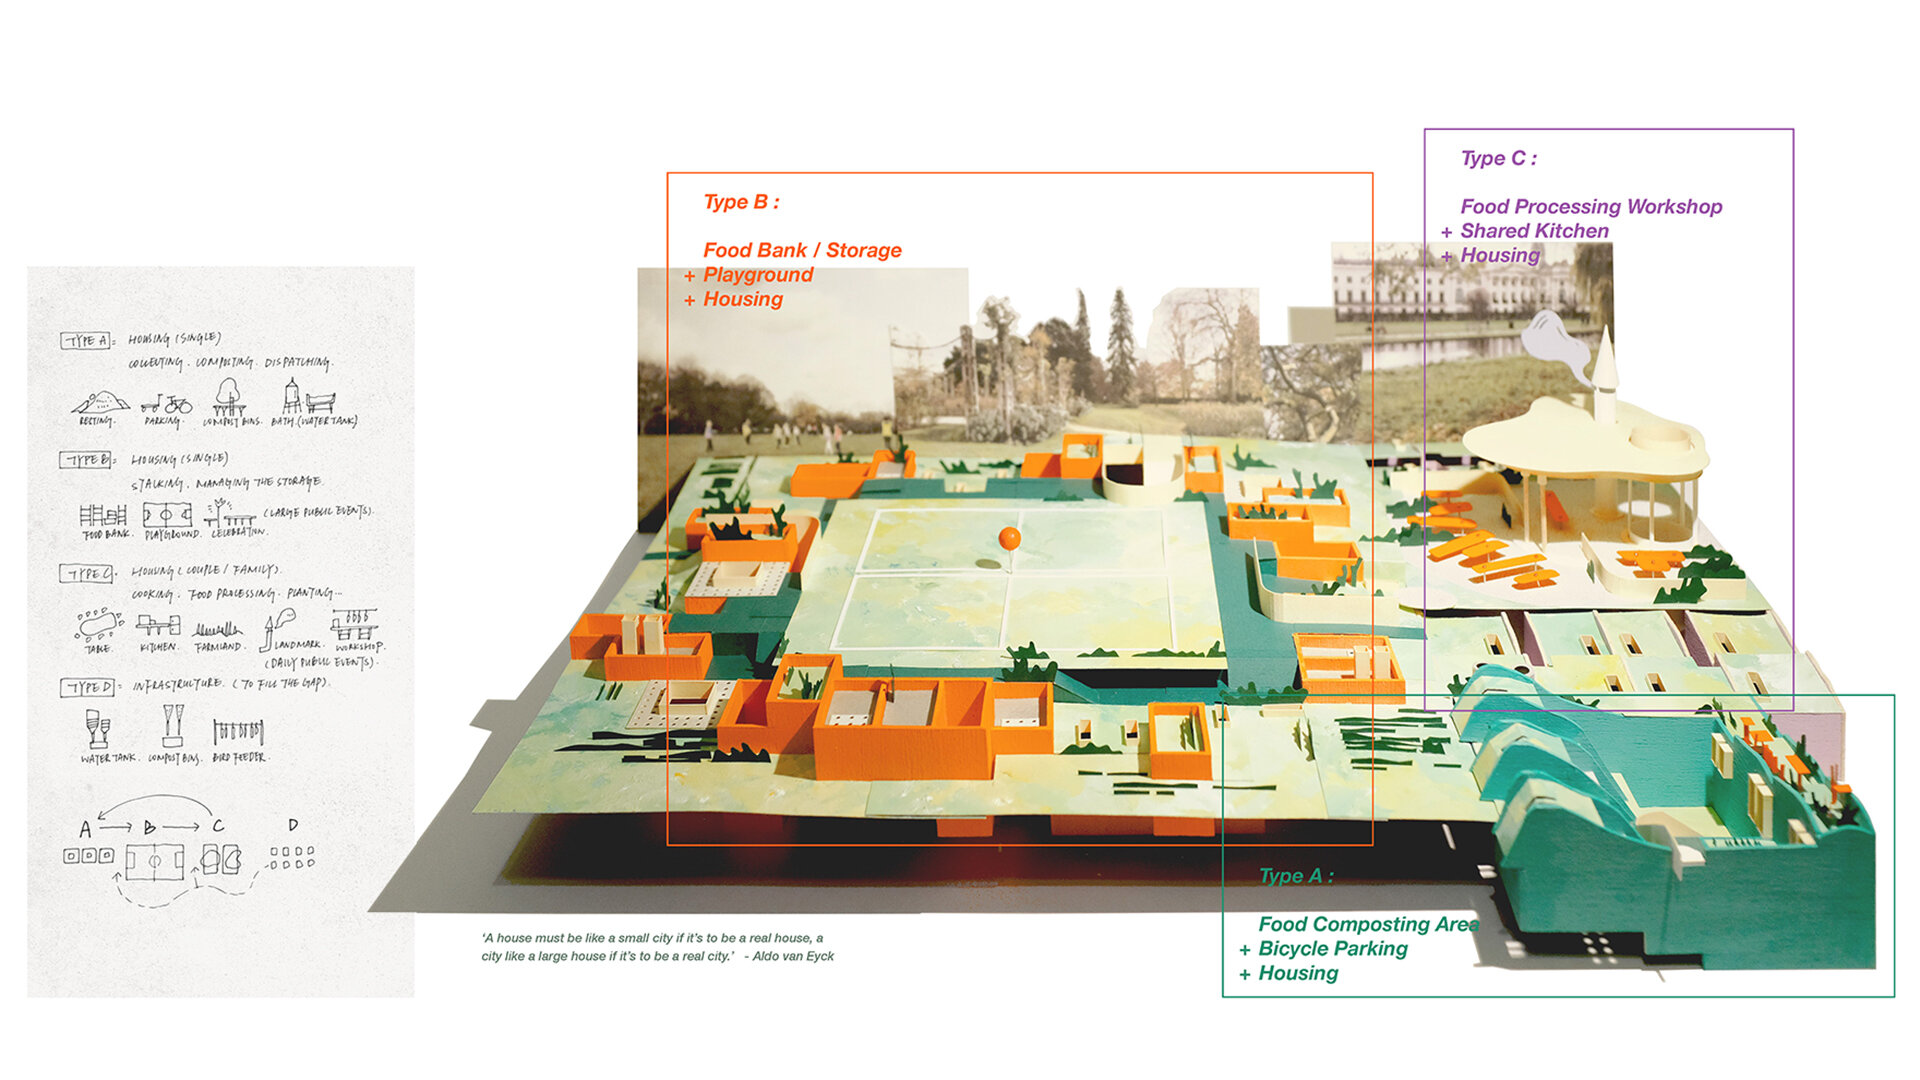 Productive Landscape - Regent’s Park Food Community_Meiying Hong_MArch Year 5, Bartlett School of Architecture, UCL 6.jpg